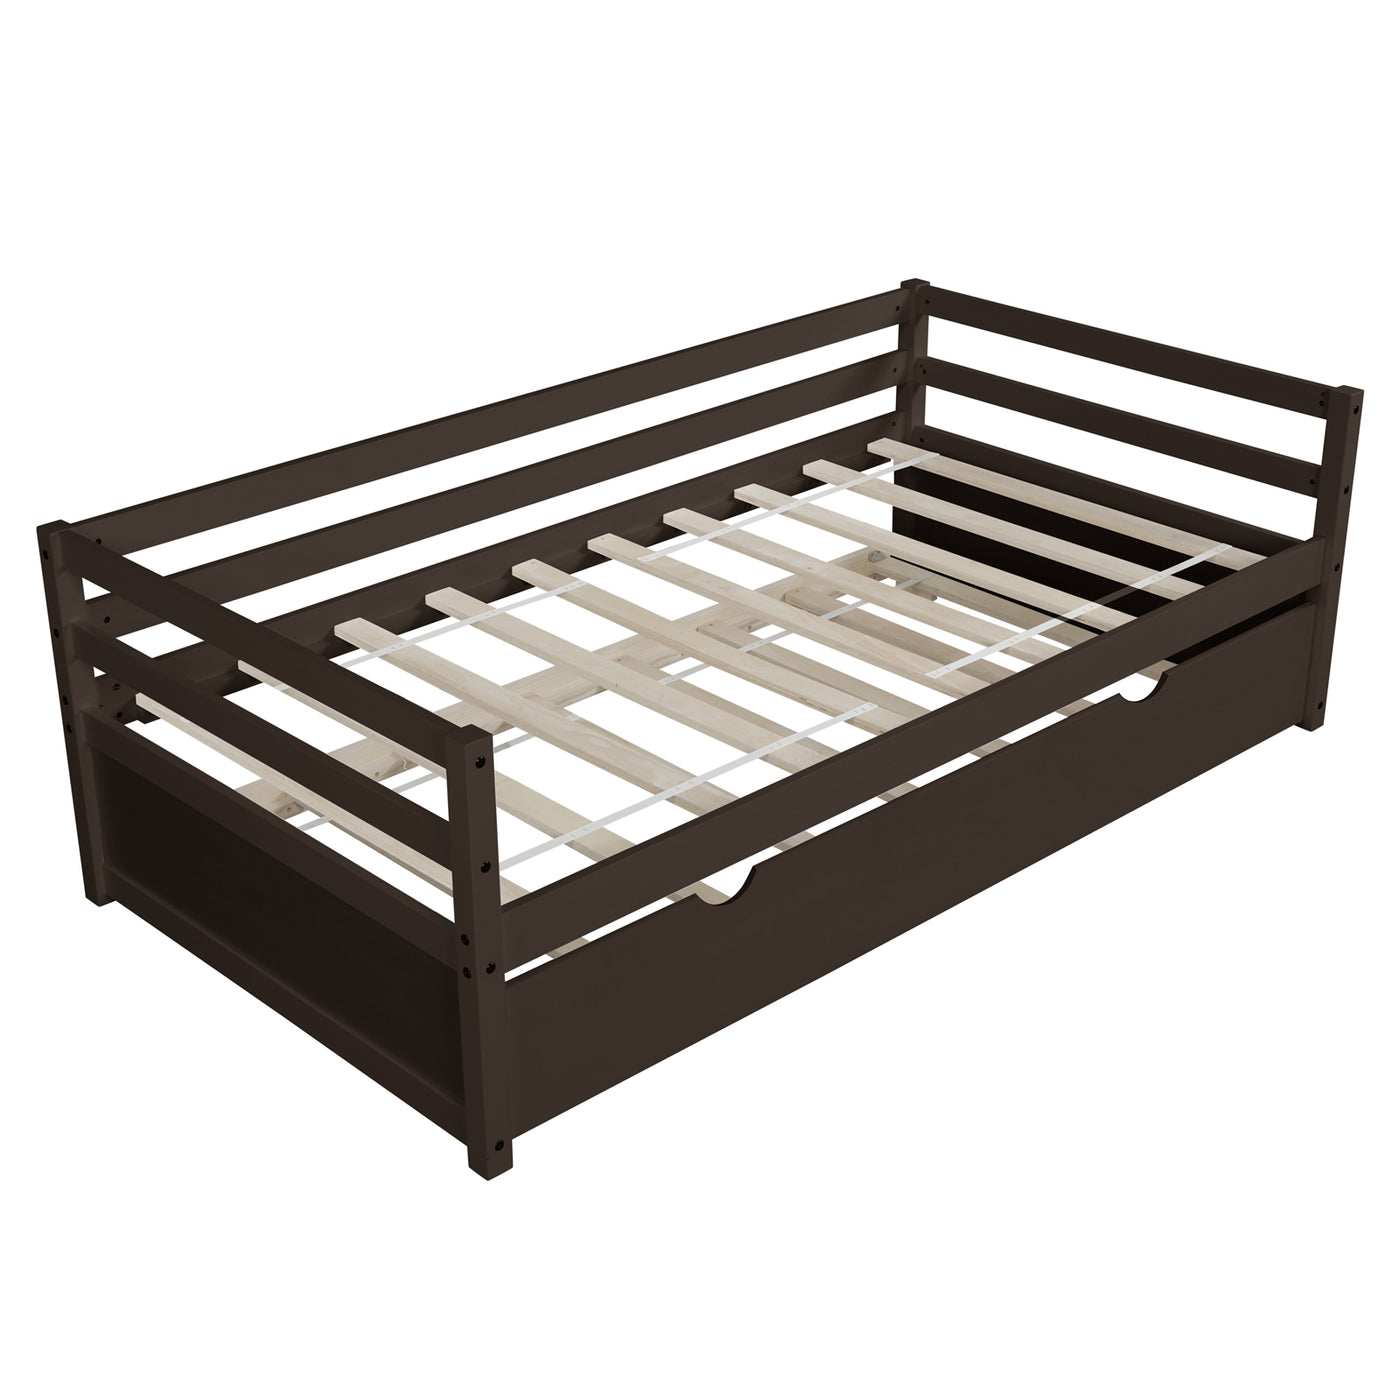 Twin Daybed with Trundle Concave Design, Sturdy Bed Frame Mattress Foundation